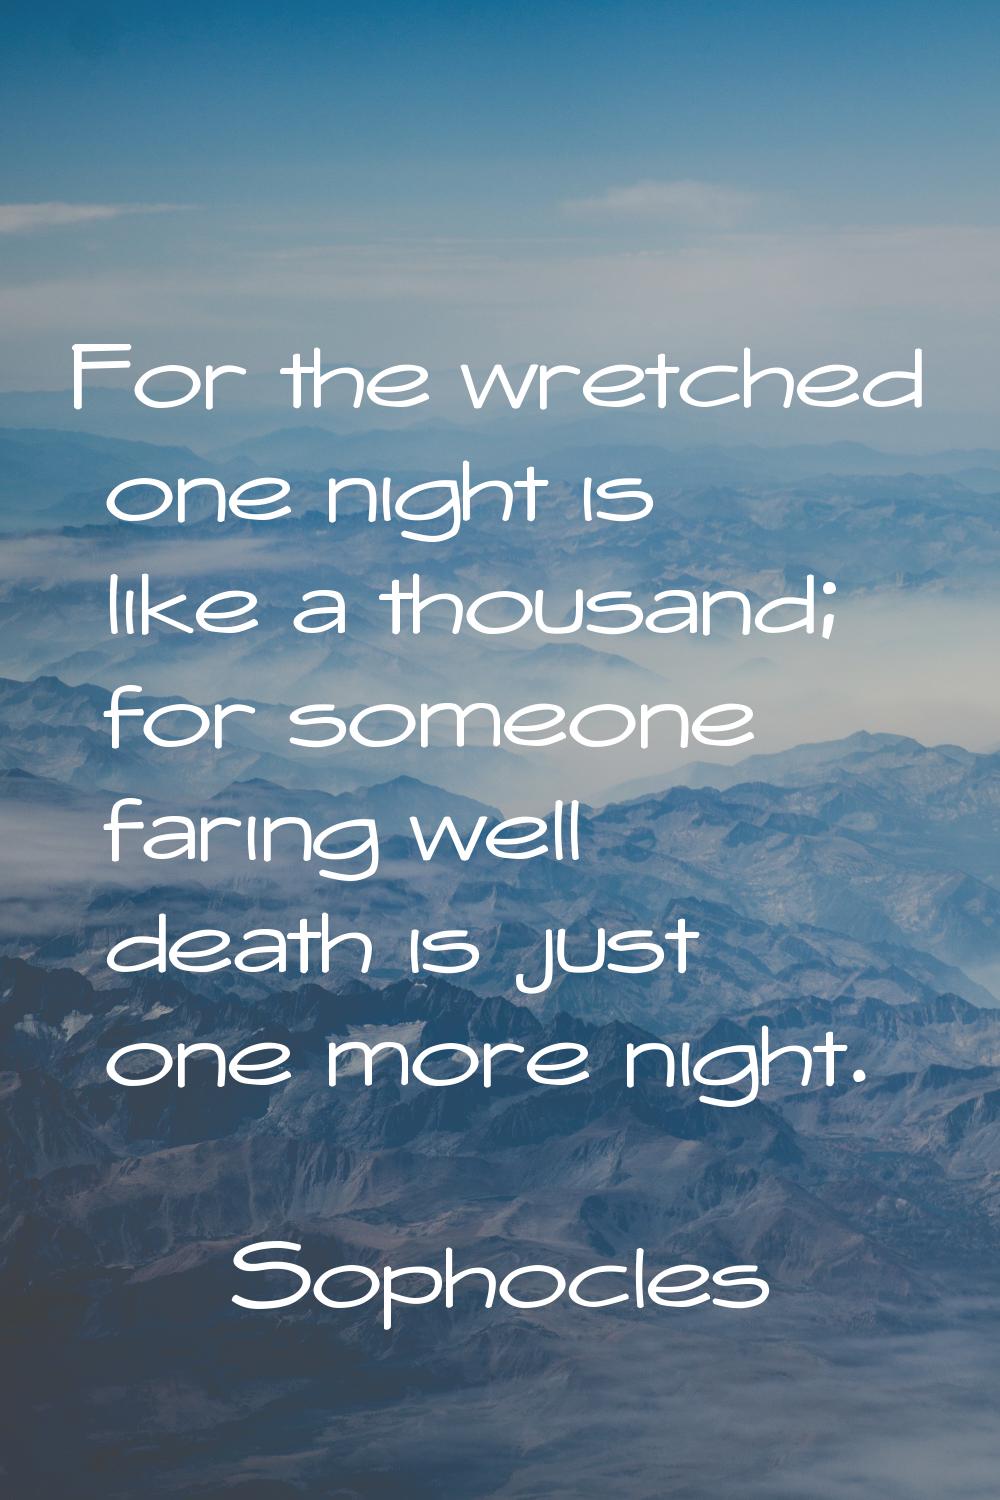 For the wretched one night is like a thousand; for someone faring well death is just one more night